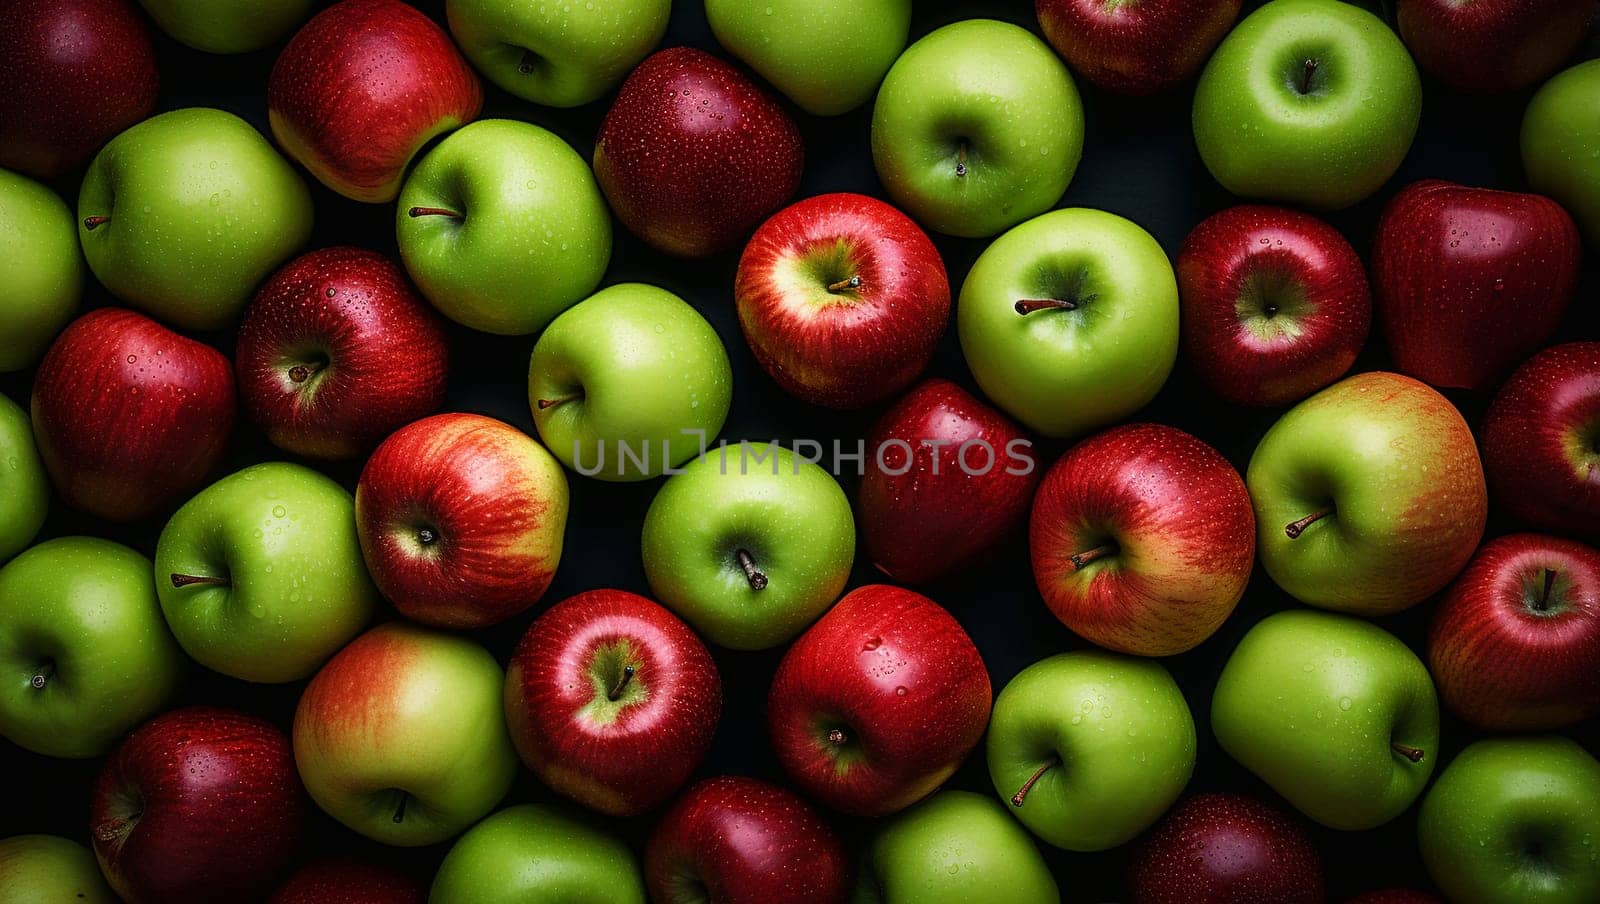 Red and green apples. Background of ripe apples. by Sneznyj